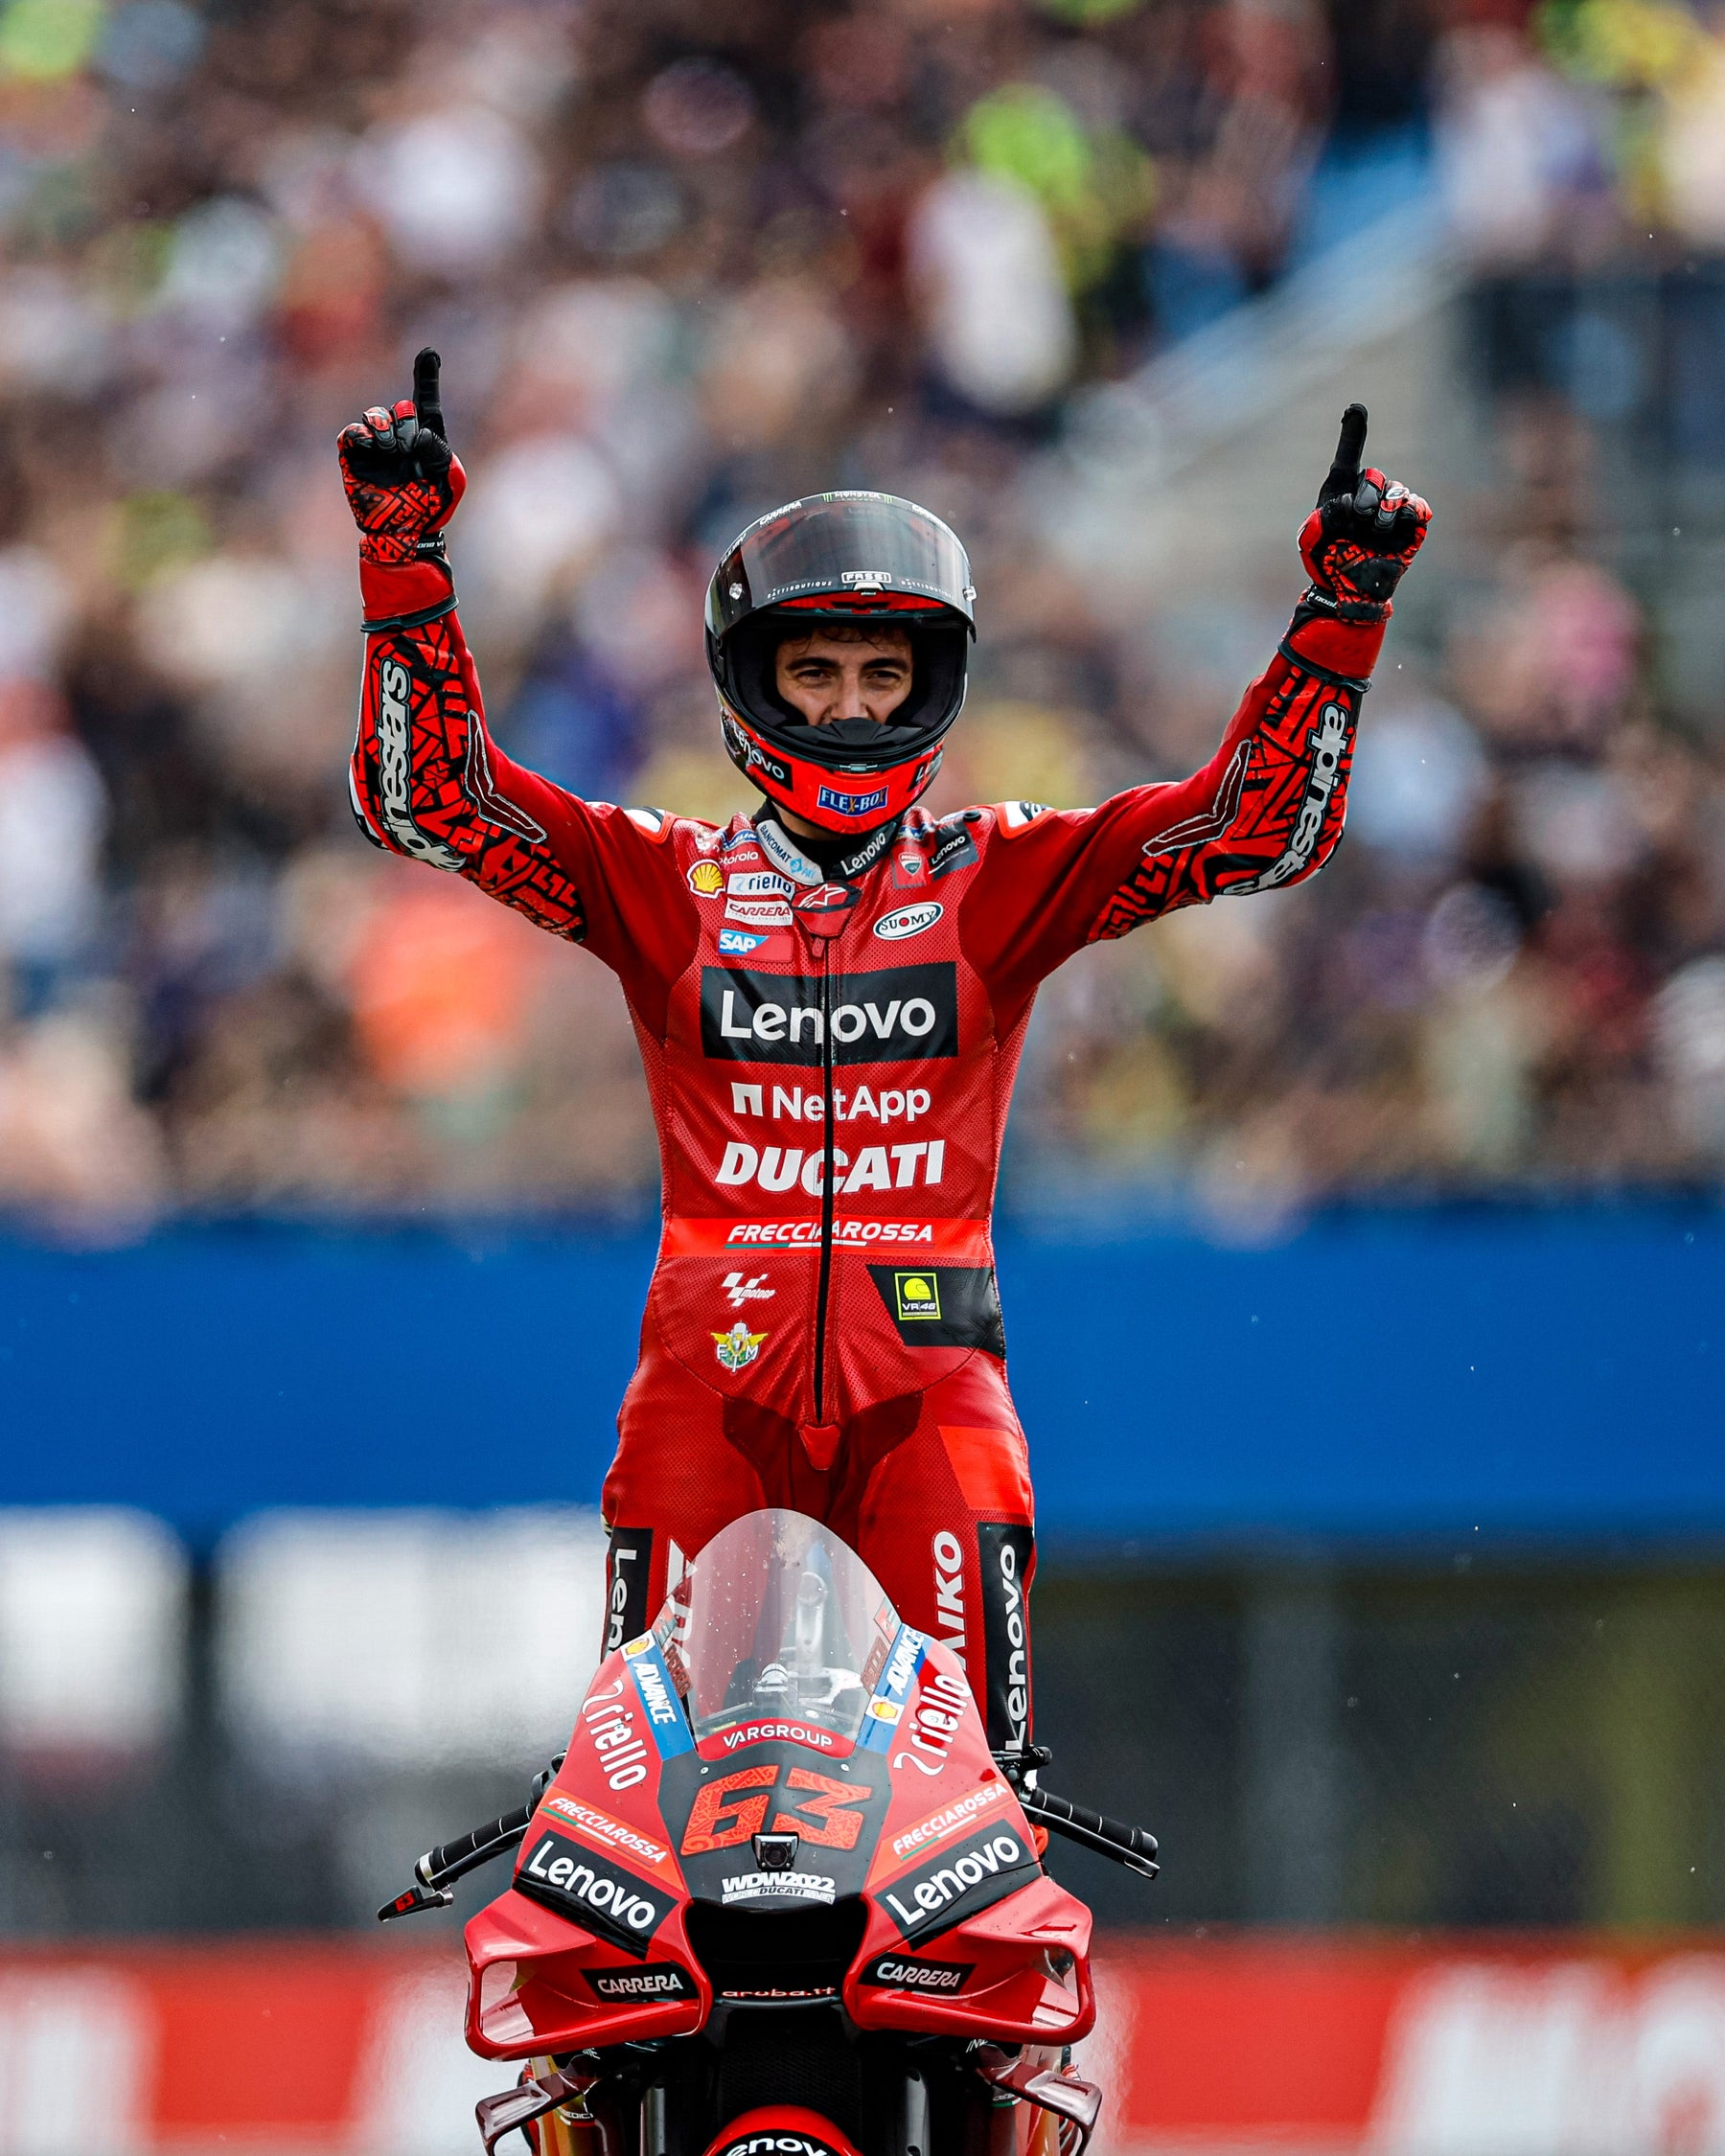 PECCO BAGNAIA SEALS MOTOGP VICTORY IN DOUBLE-PODIUM FINISH FOR ALPINESTARS WITH MAVERICK VINALES THIRD IN ASSEN, NETHERLANDS